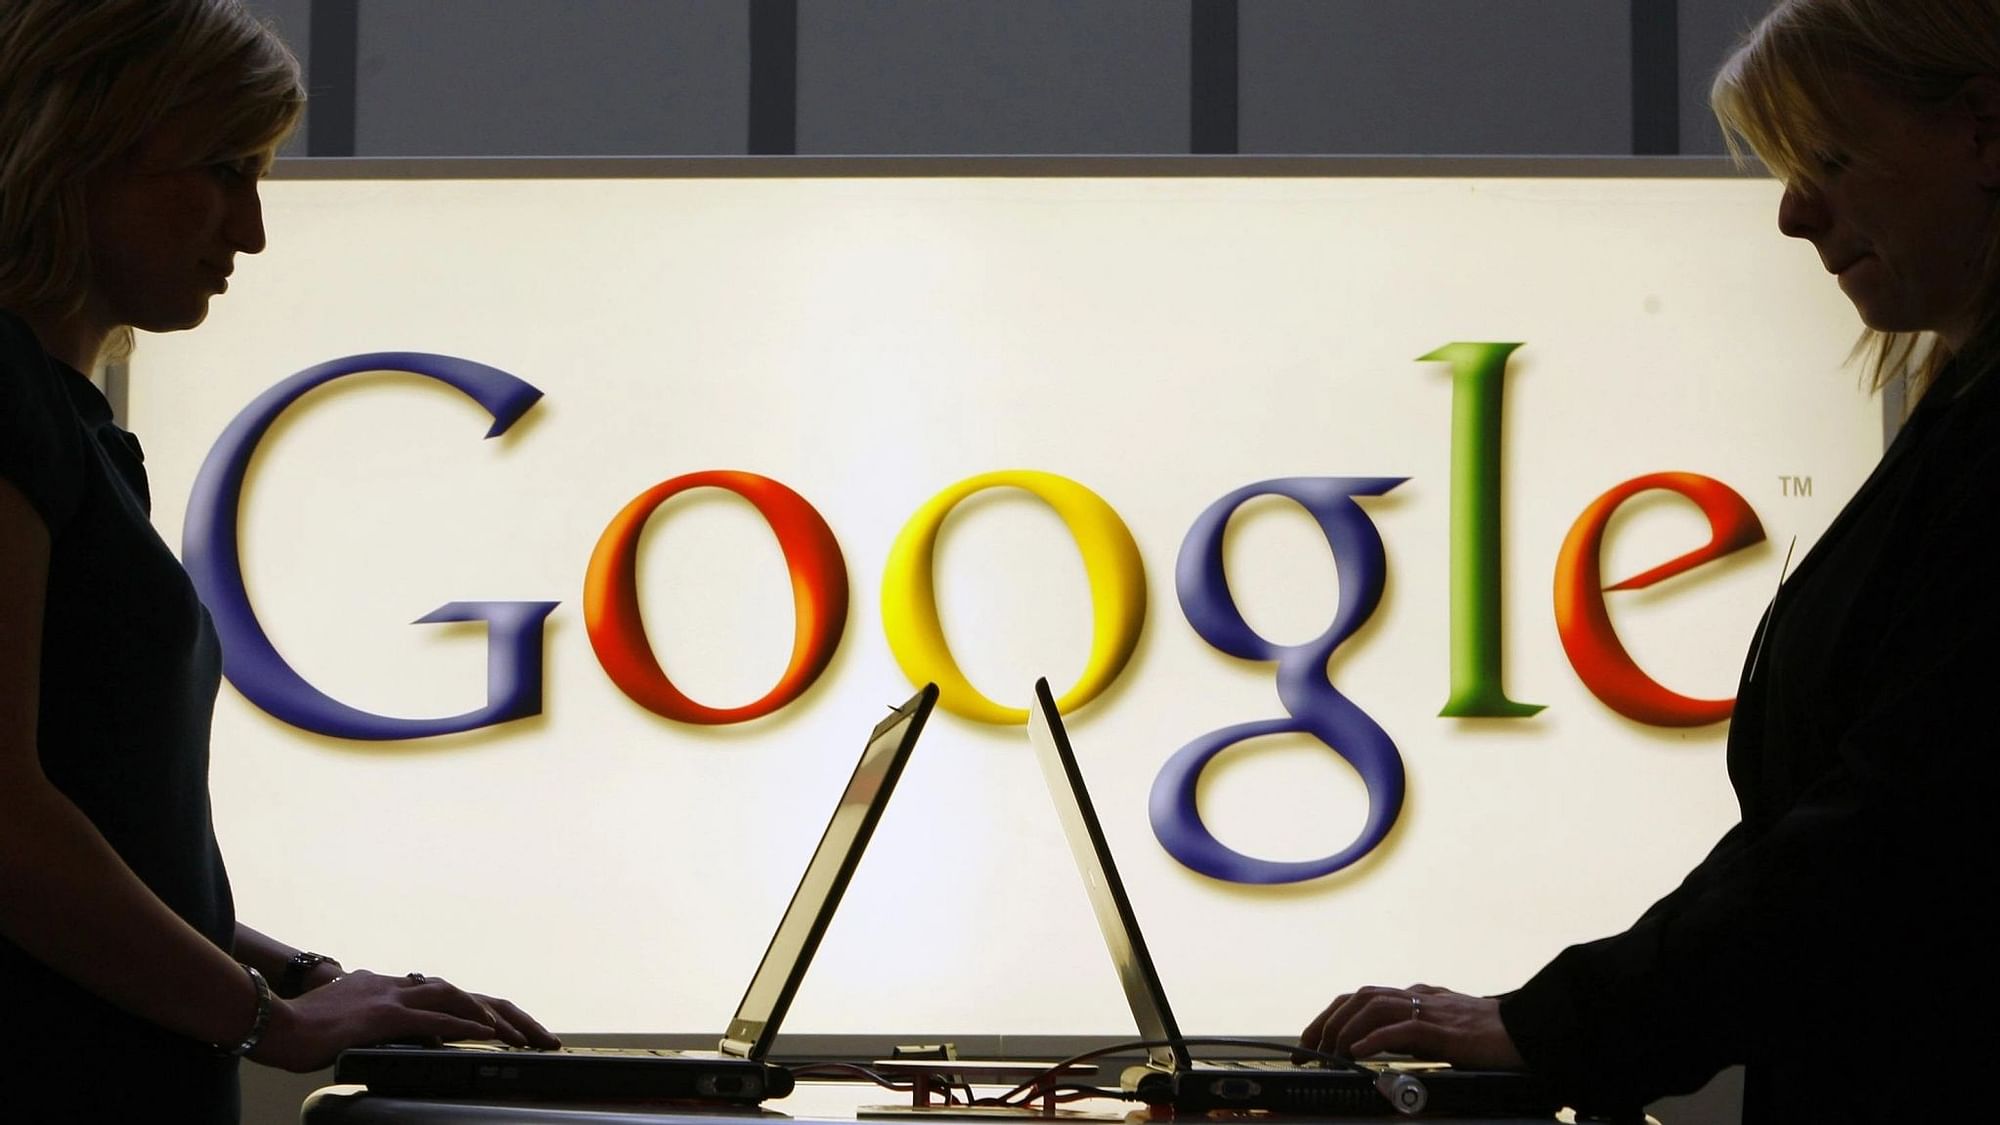 Google services, including Gmail, YouTube and Google Search were down momentarily on Monday, 14 December.